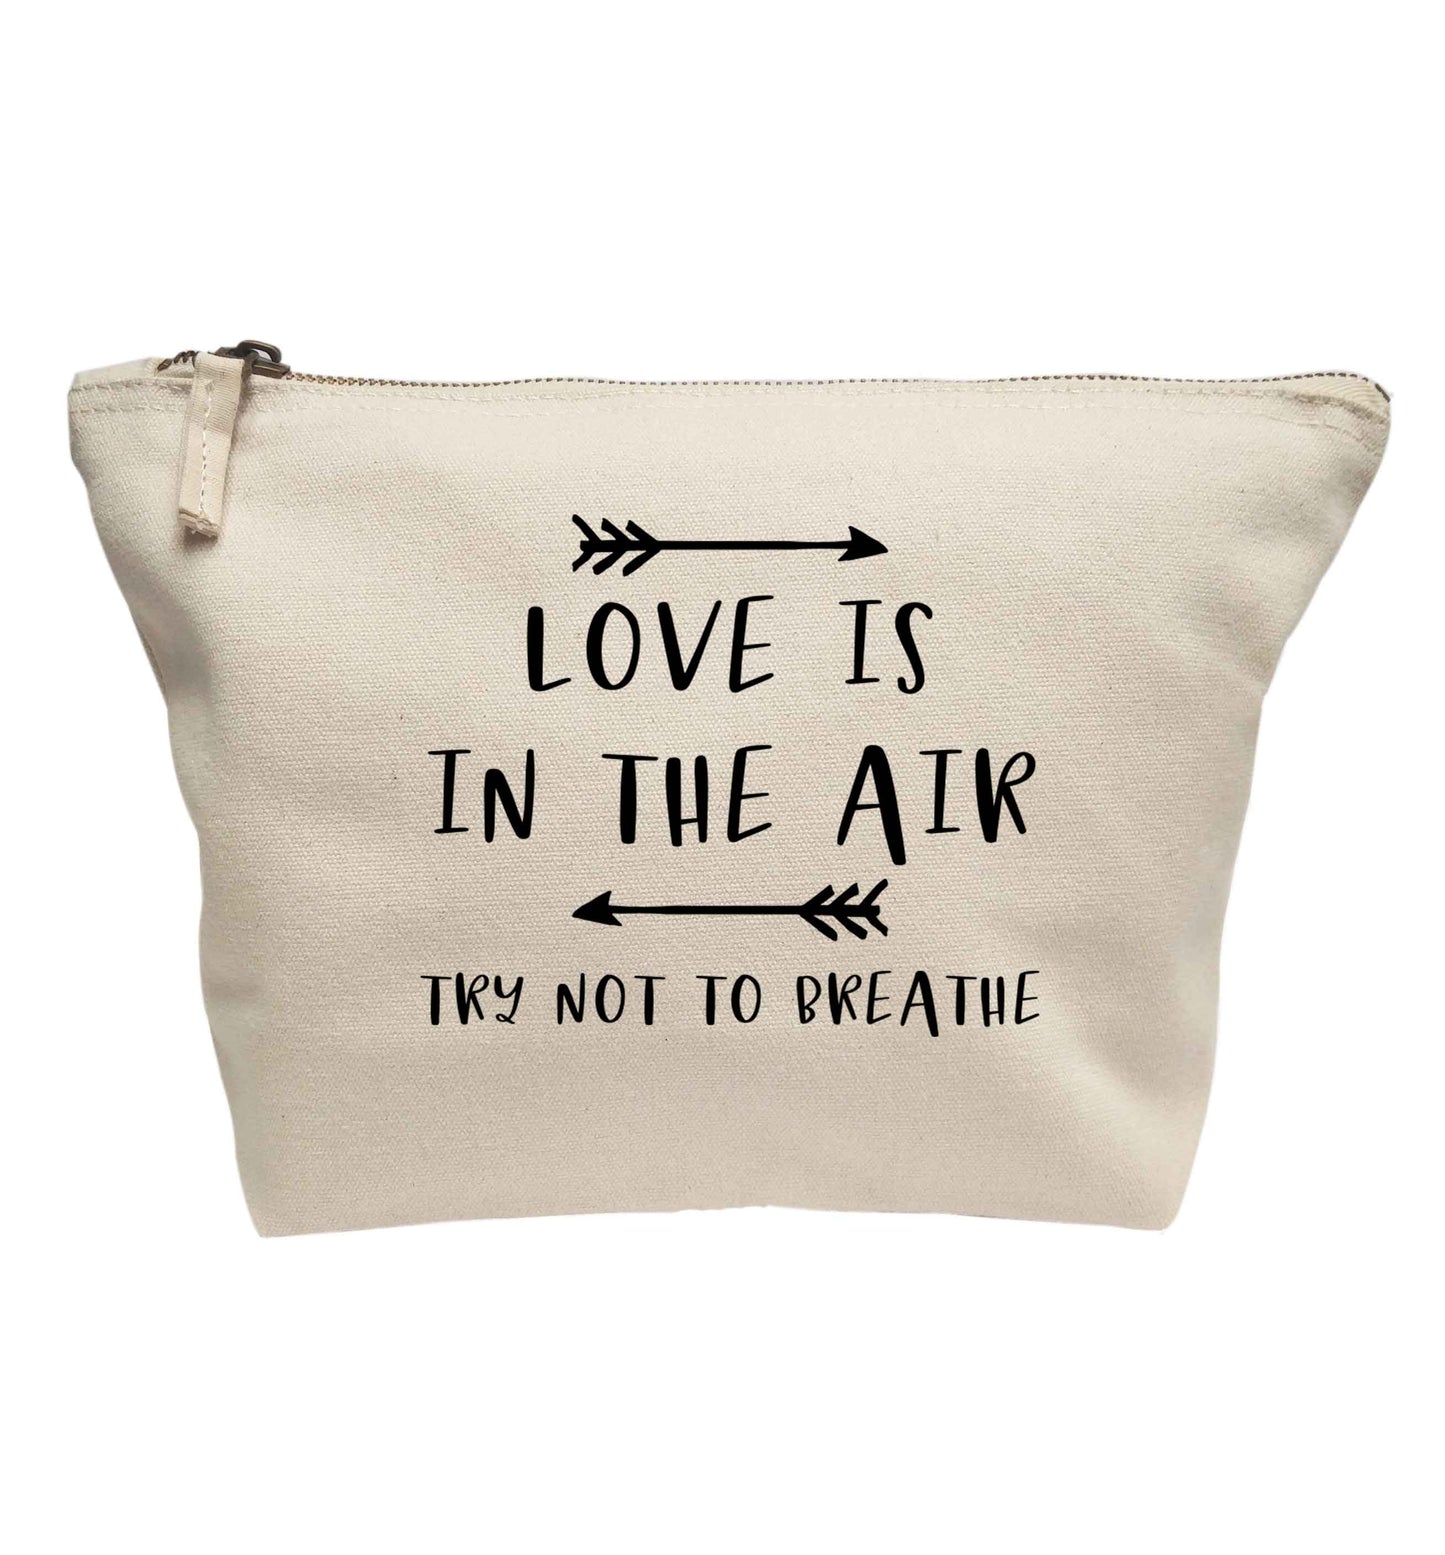 Love is in the air try not to breathe | Makeup / wash bag